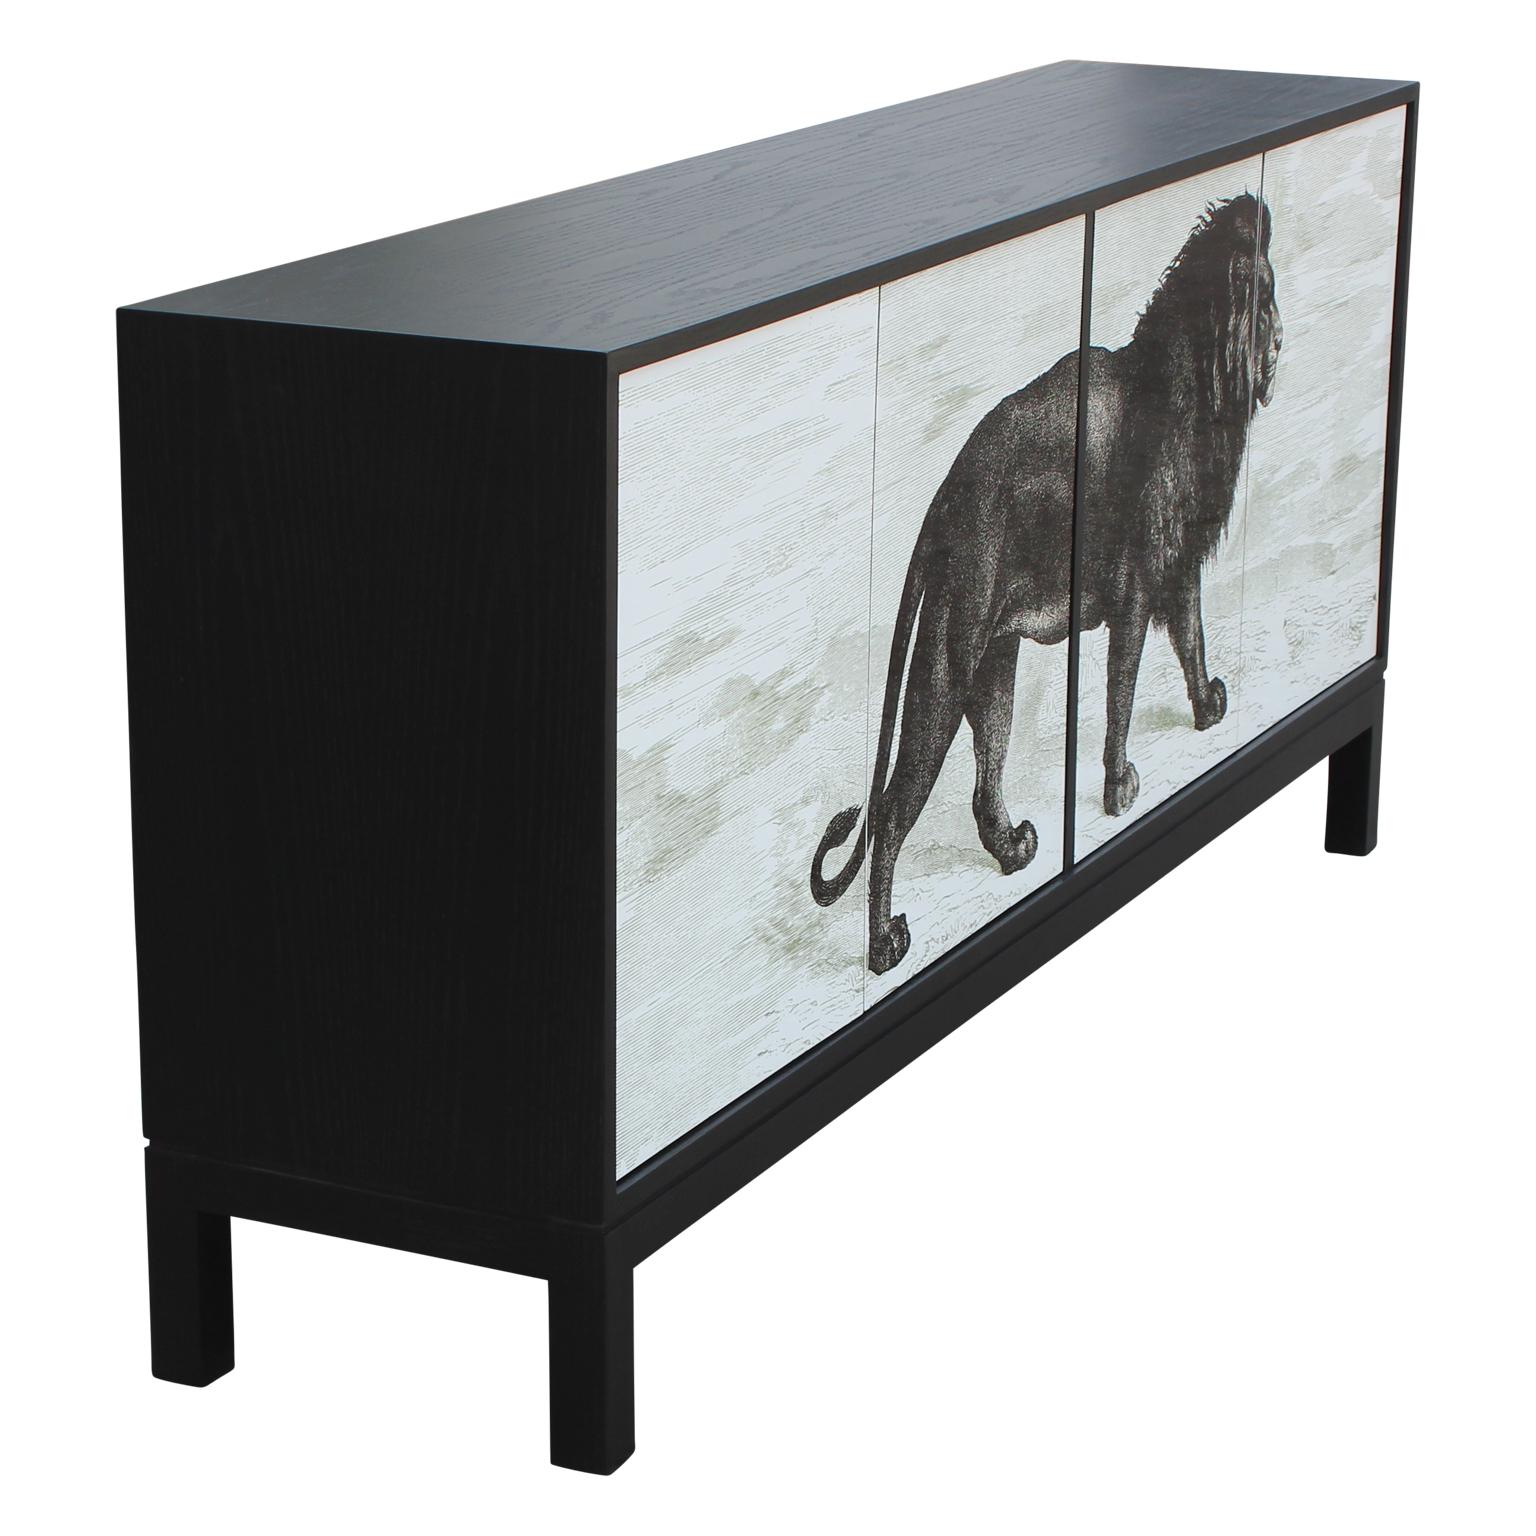 Stylish custom made credenza or sideboard. It has sublimated lion print that is divided between the panels and is in a classic black color.

Other custom designs can be made including but not limited to:
-Custom sublimated design